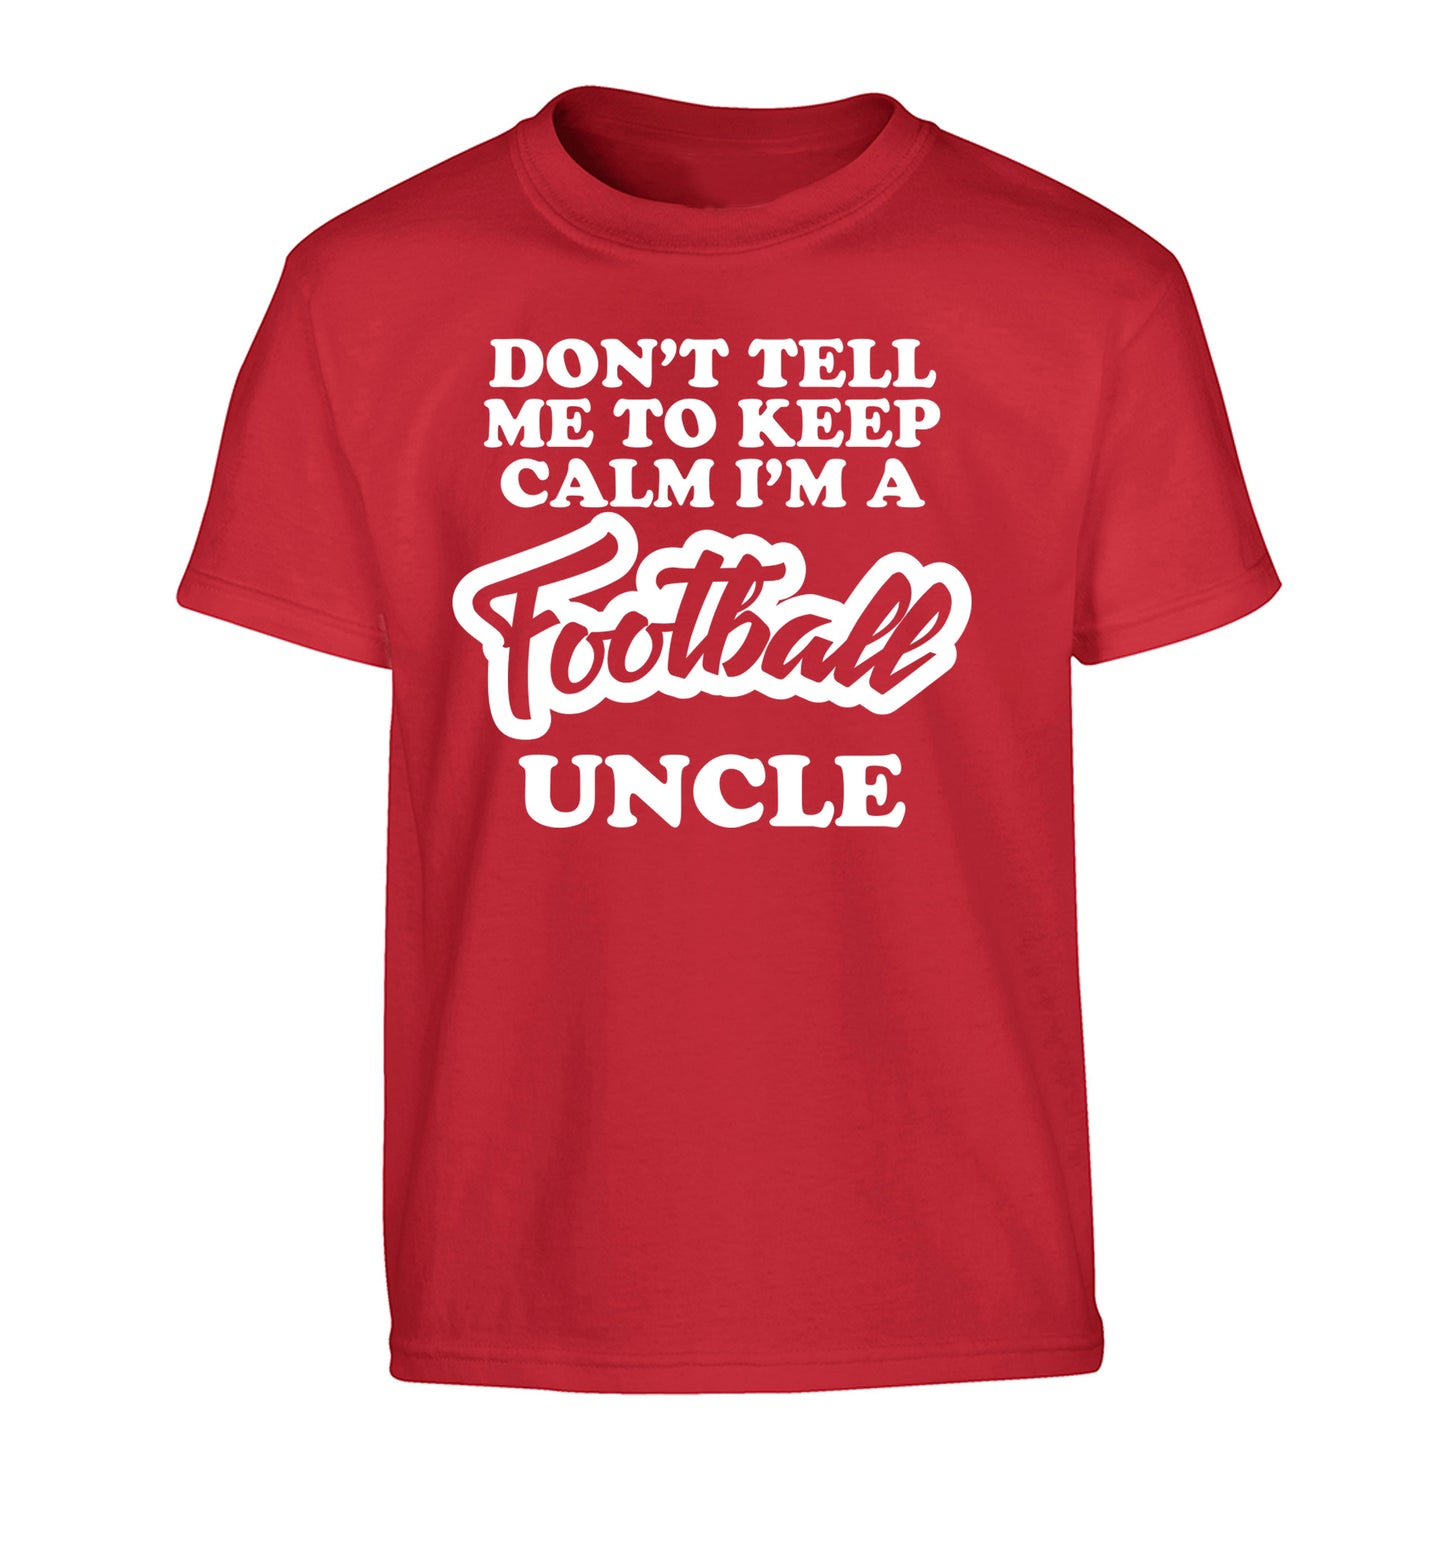 Don't tell me to keep calm I'm a football uncle Children's red Tshirt 12-14 Years